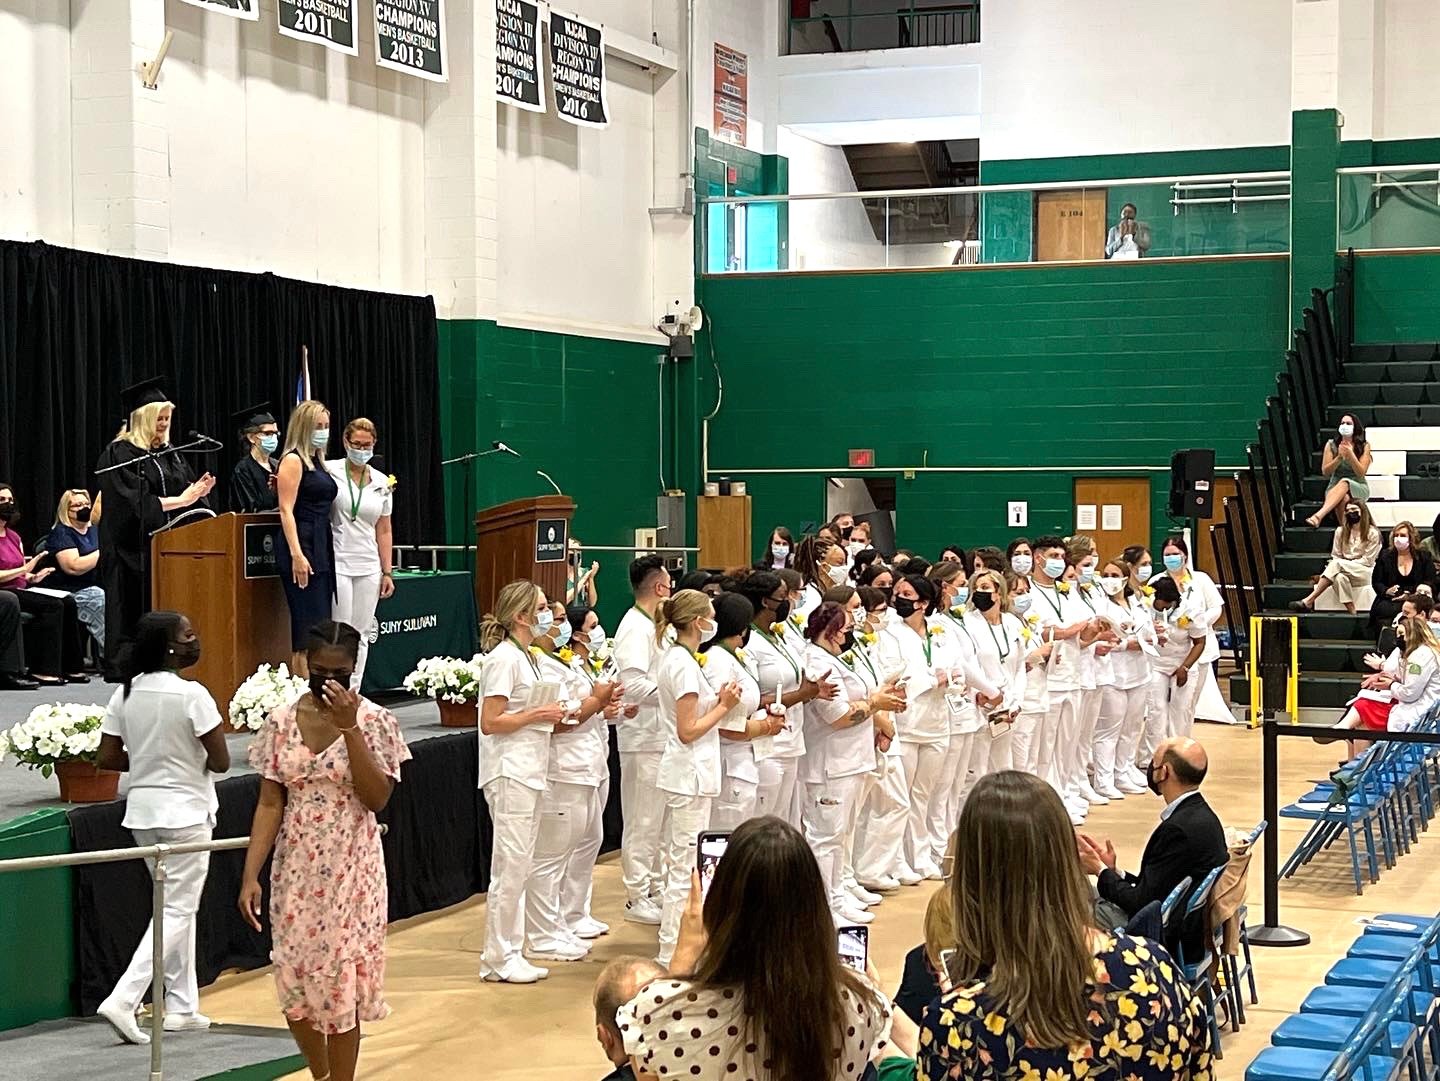 In a separate ceremony, SUNY Sullivan held its pinning ceremony for graduates of the college’s nursing and respiratory care programs.